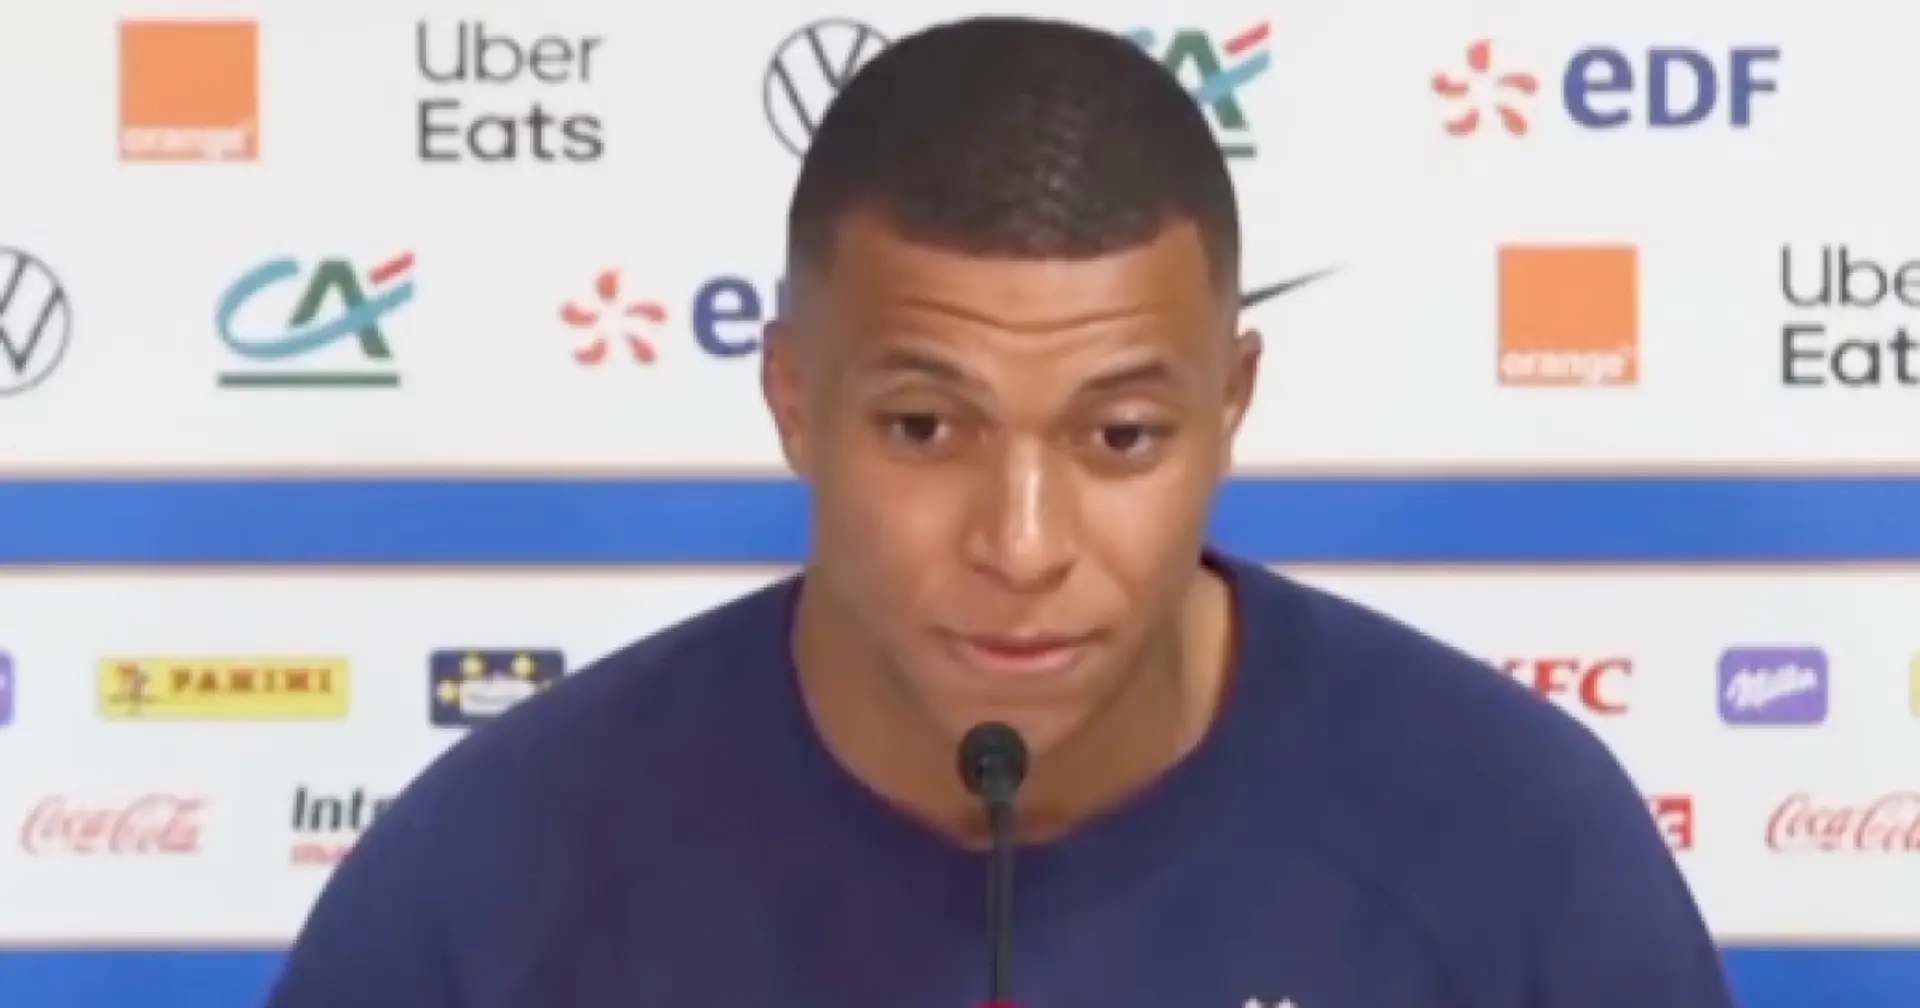 'We have an agreement': Mbappe breaks silence on Real Madrid transfer